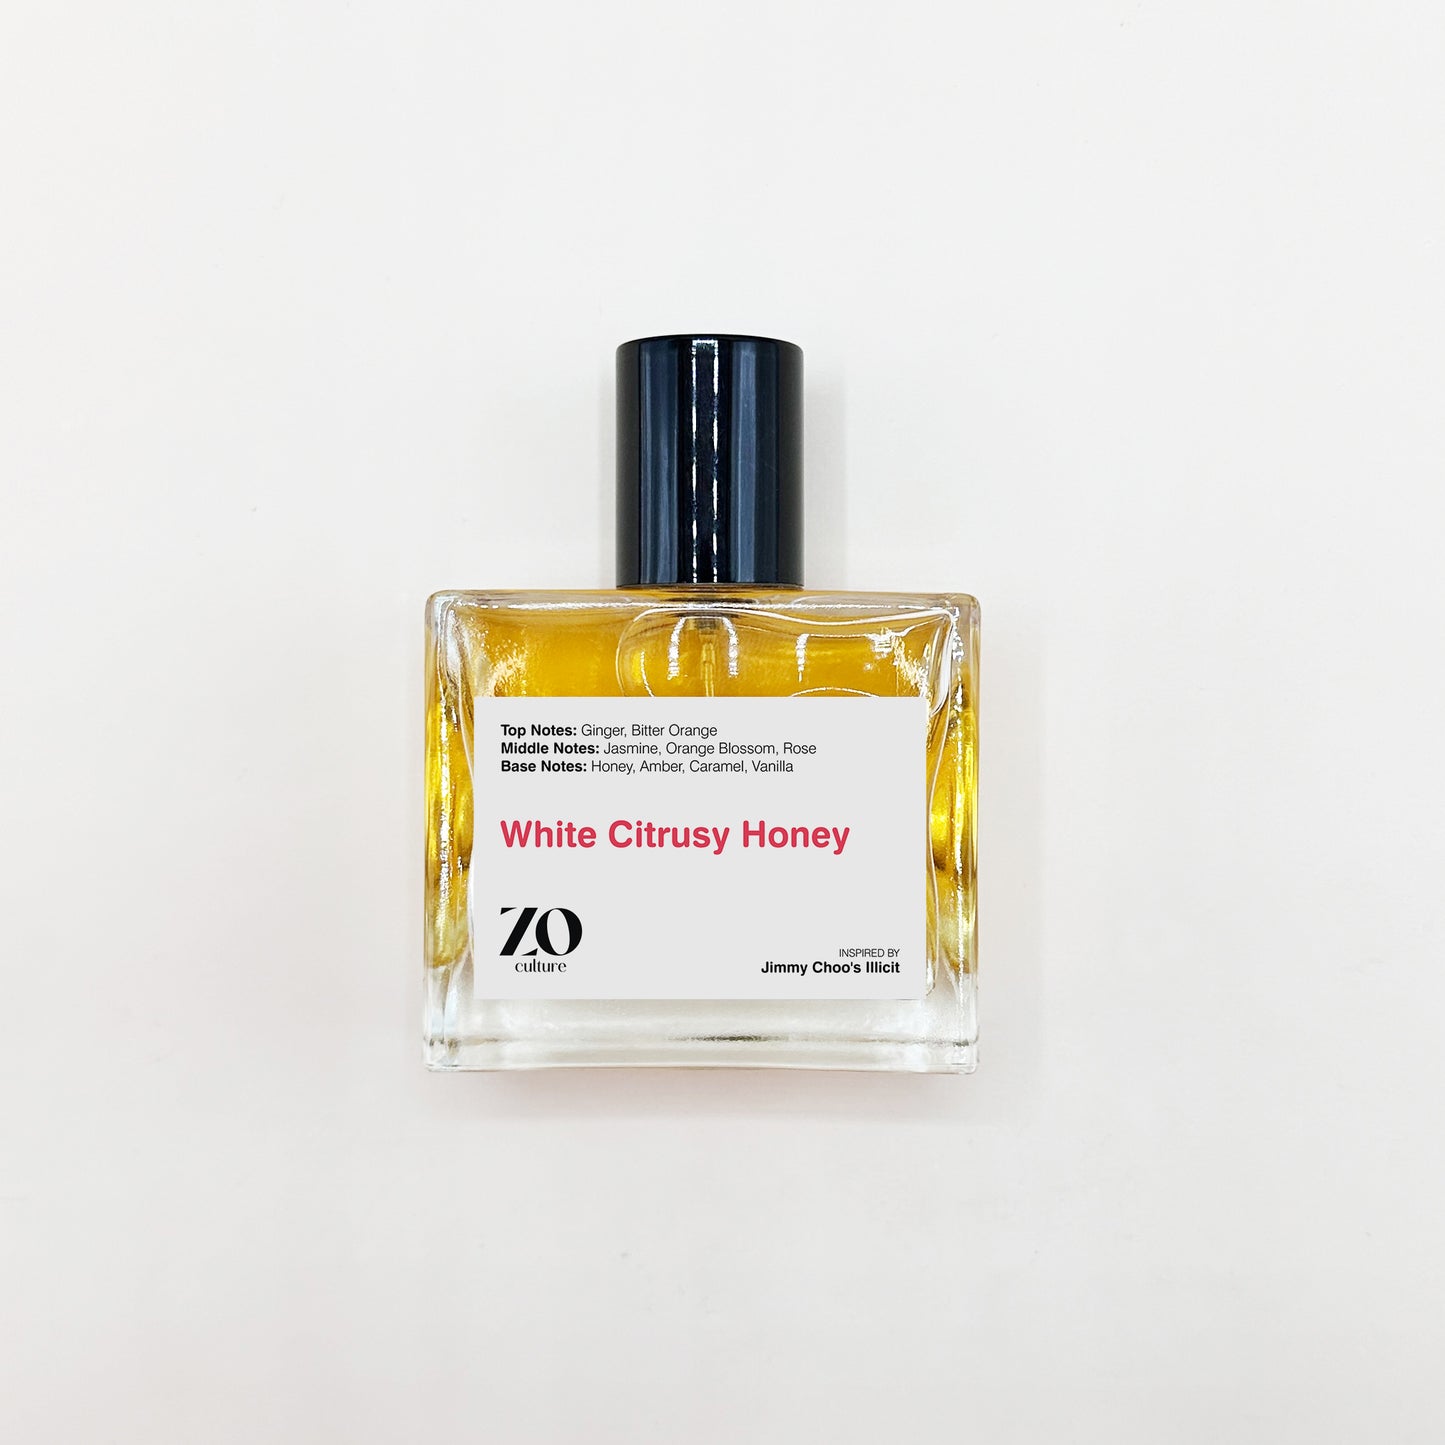 Women Perfume White Citrusy Honey - Inspired by Illicit ZoCulture